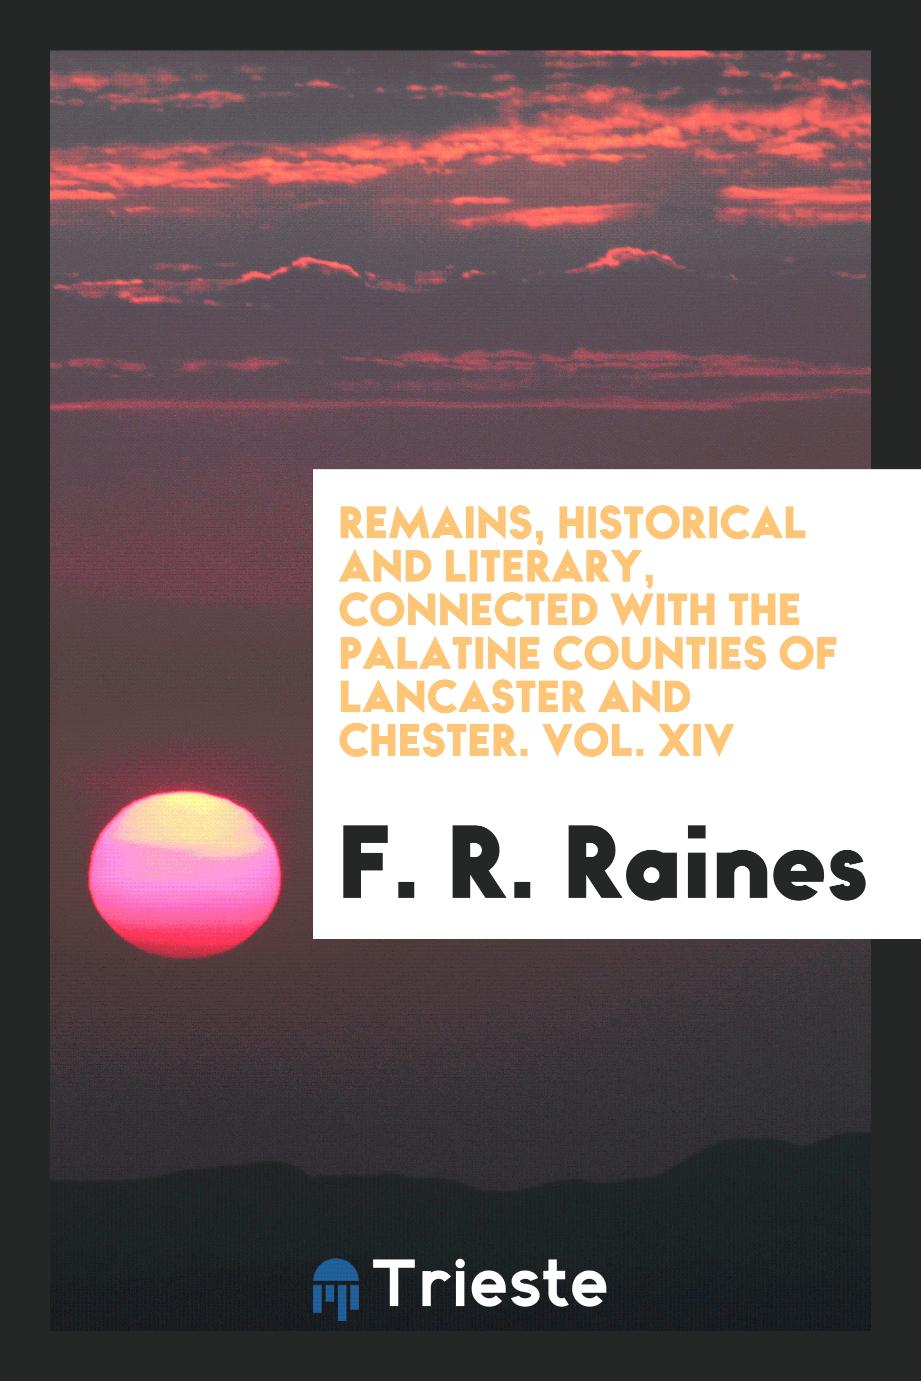 Remains, Historical and Literary, Connected with the Palatine Counties of Lancaster and Chester. Vol. XIV